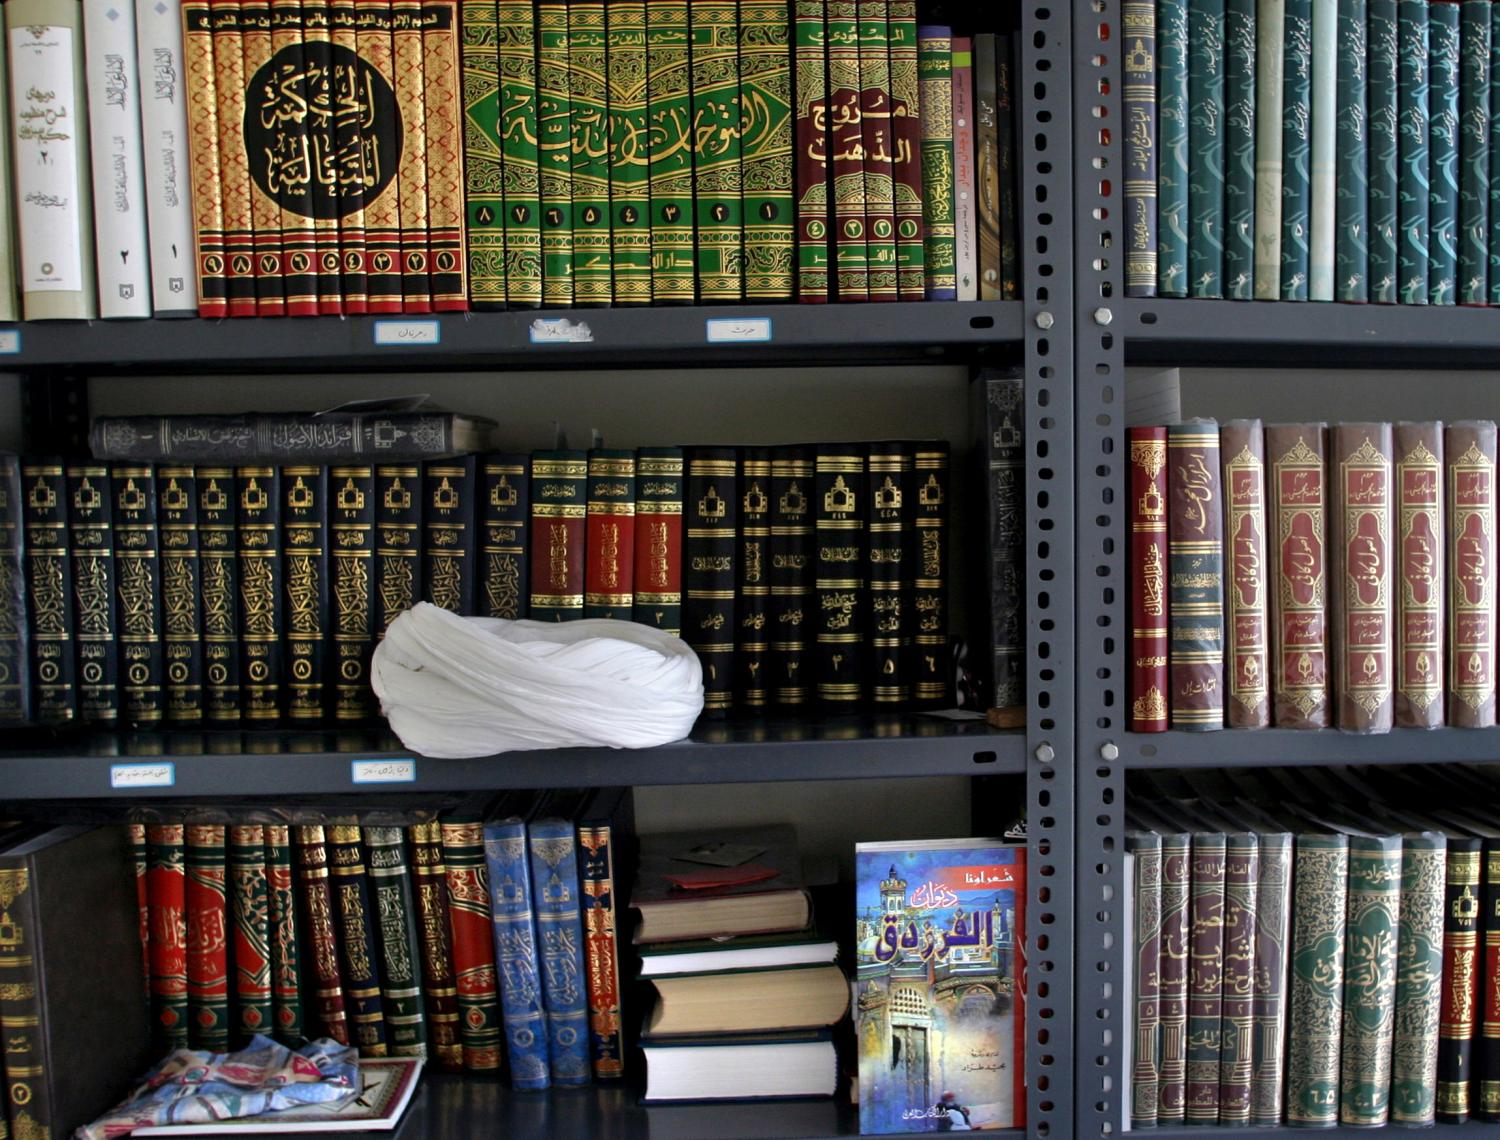 Iranian cleric Ayatollah Sepehr Norouzi's turban rests on a shelf in the library of his home in Tehran July 31, 2005. REUTERS/Morteza Nikoubazl  CJF/SN - RP6DRMTRWOAB